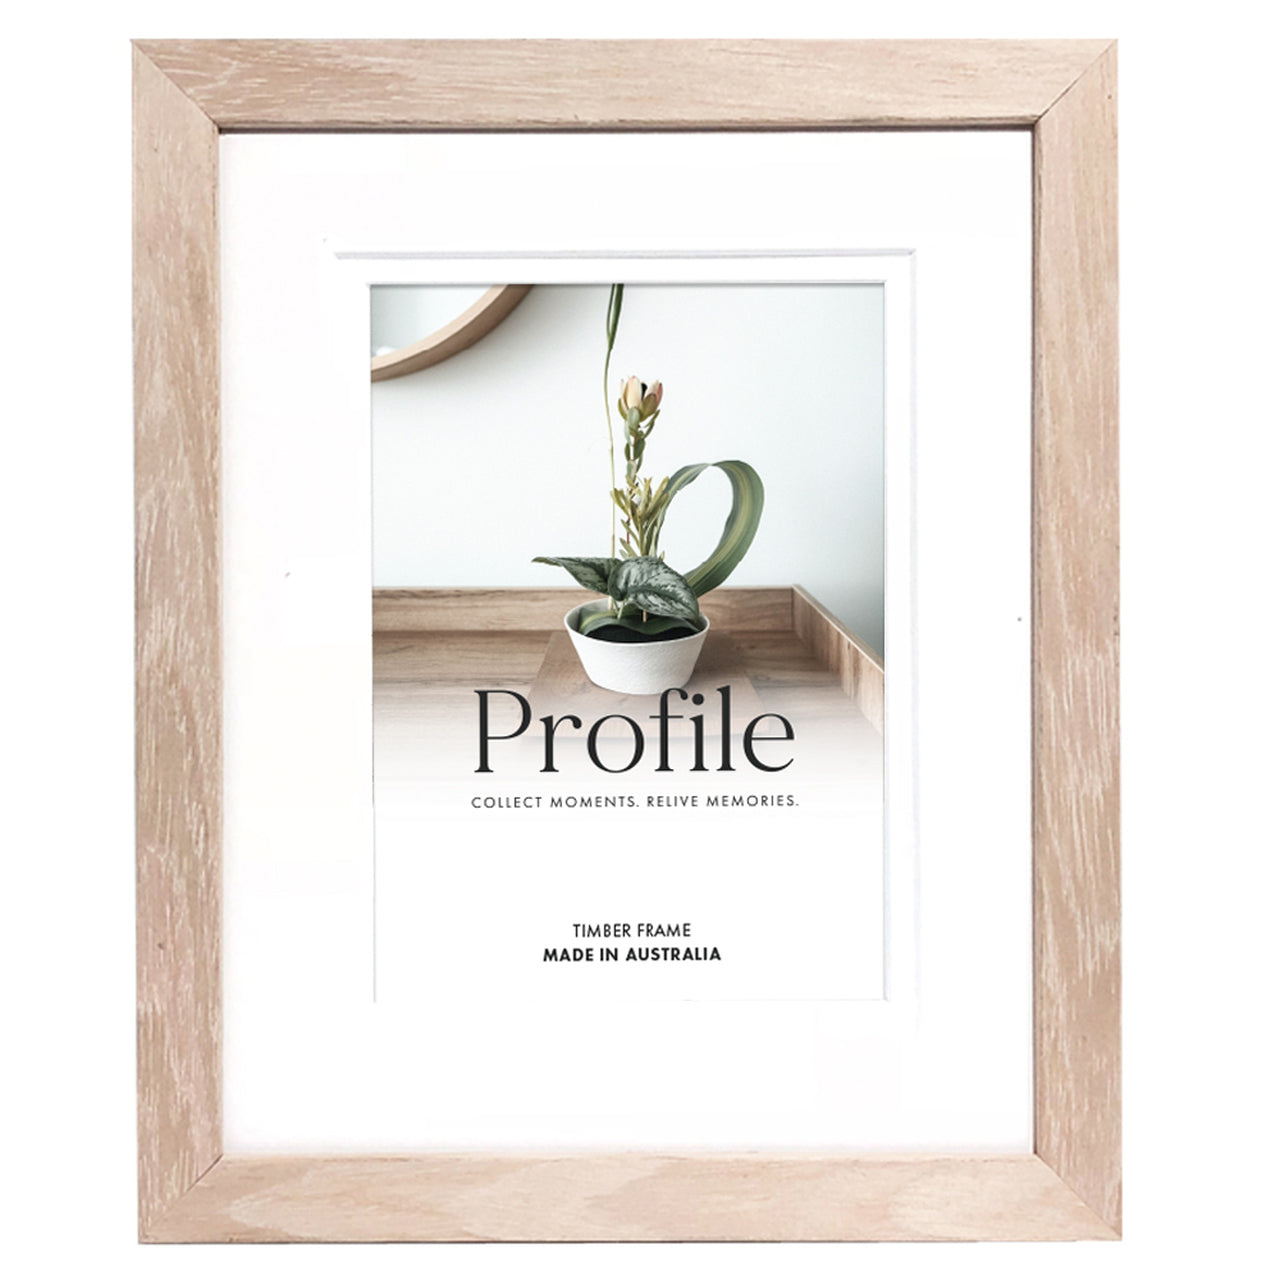 Deluxe Polar Birch 16x20 Photo Frame with 11x14 opening